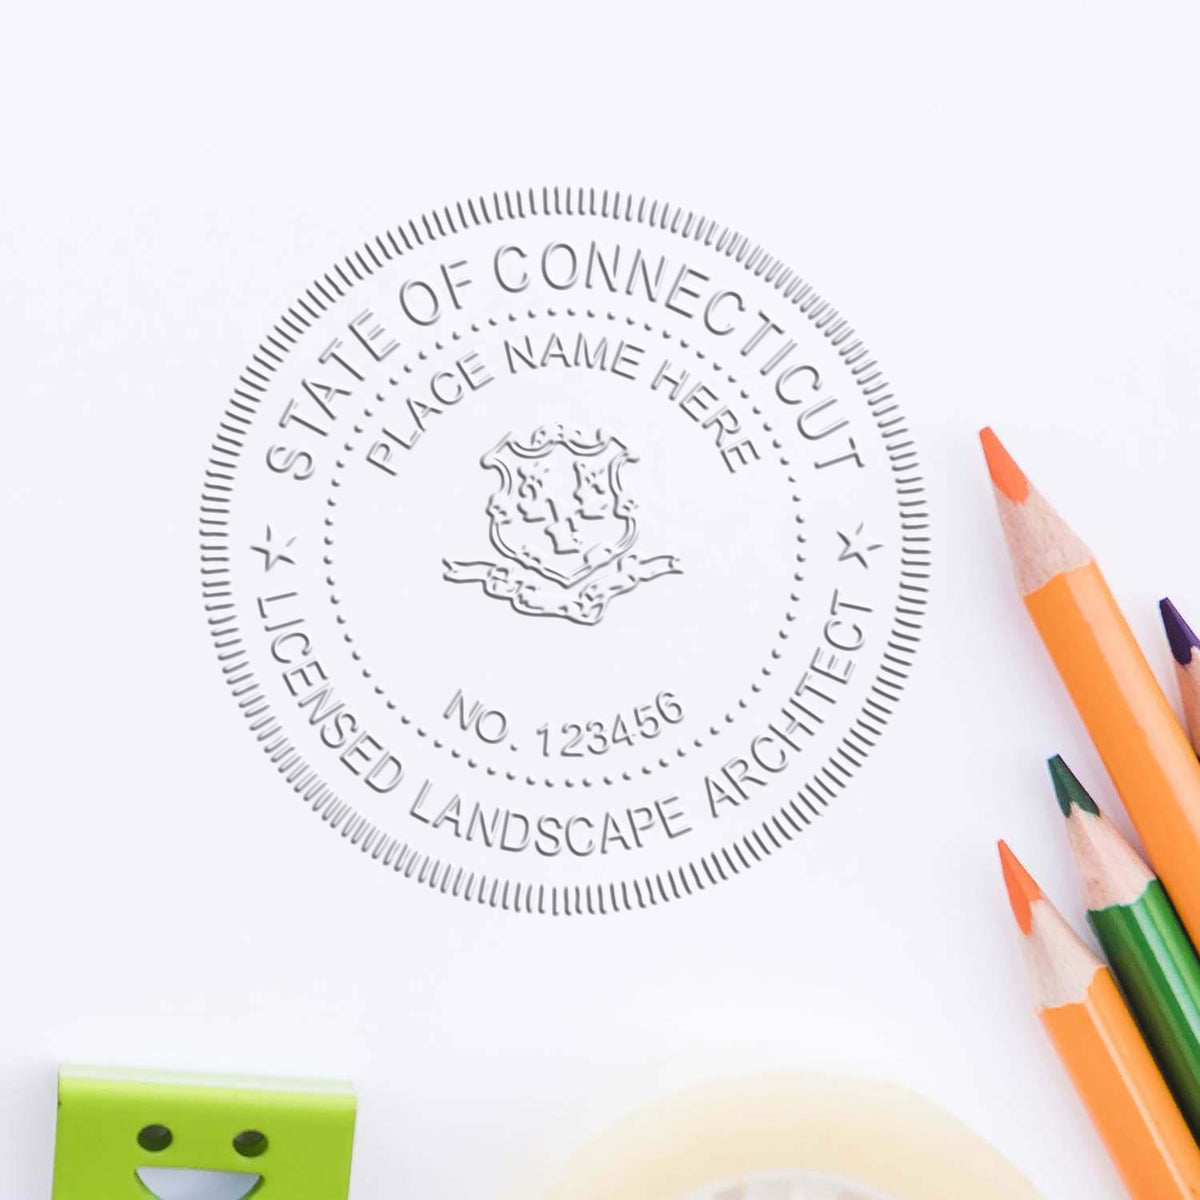 A photograph of the Hybrid Connecticut Landscape Architect Seal stamp impression reveals a vivid, professional image of the on paper.